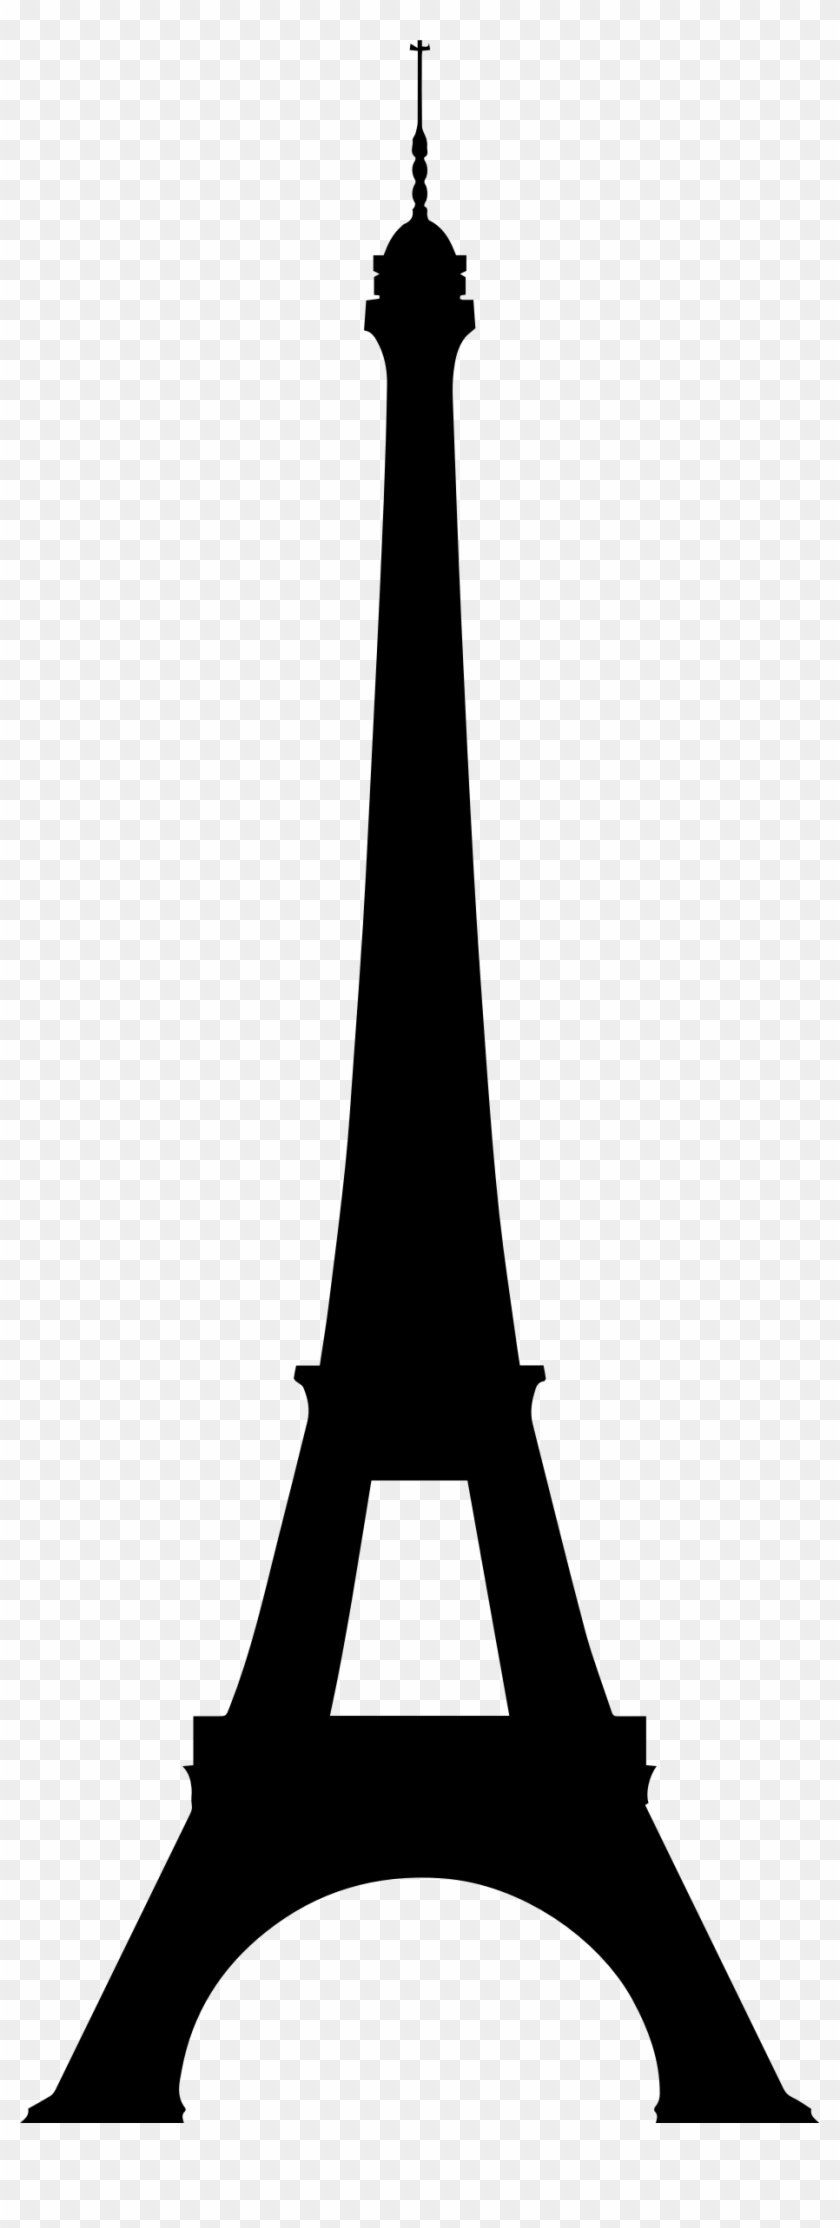 This Free Icons Png Design Of Eiffel Tower Silhouette Clipart #1822430